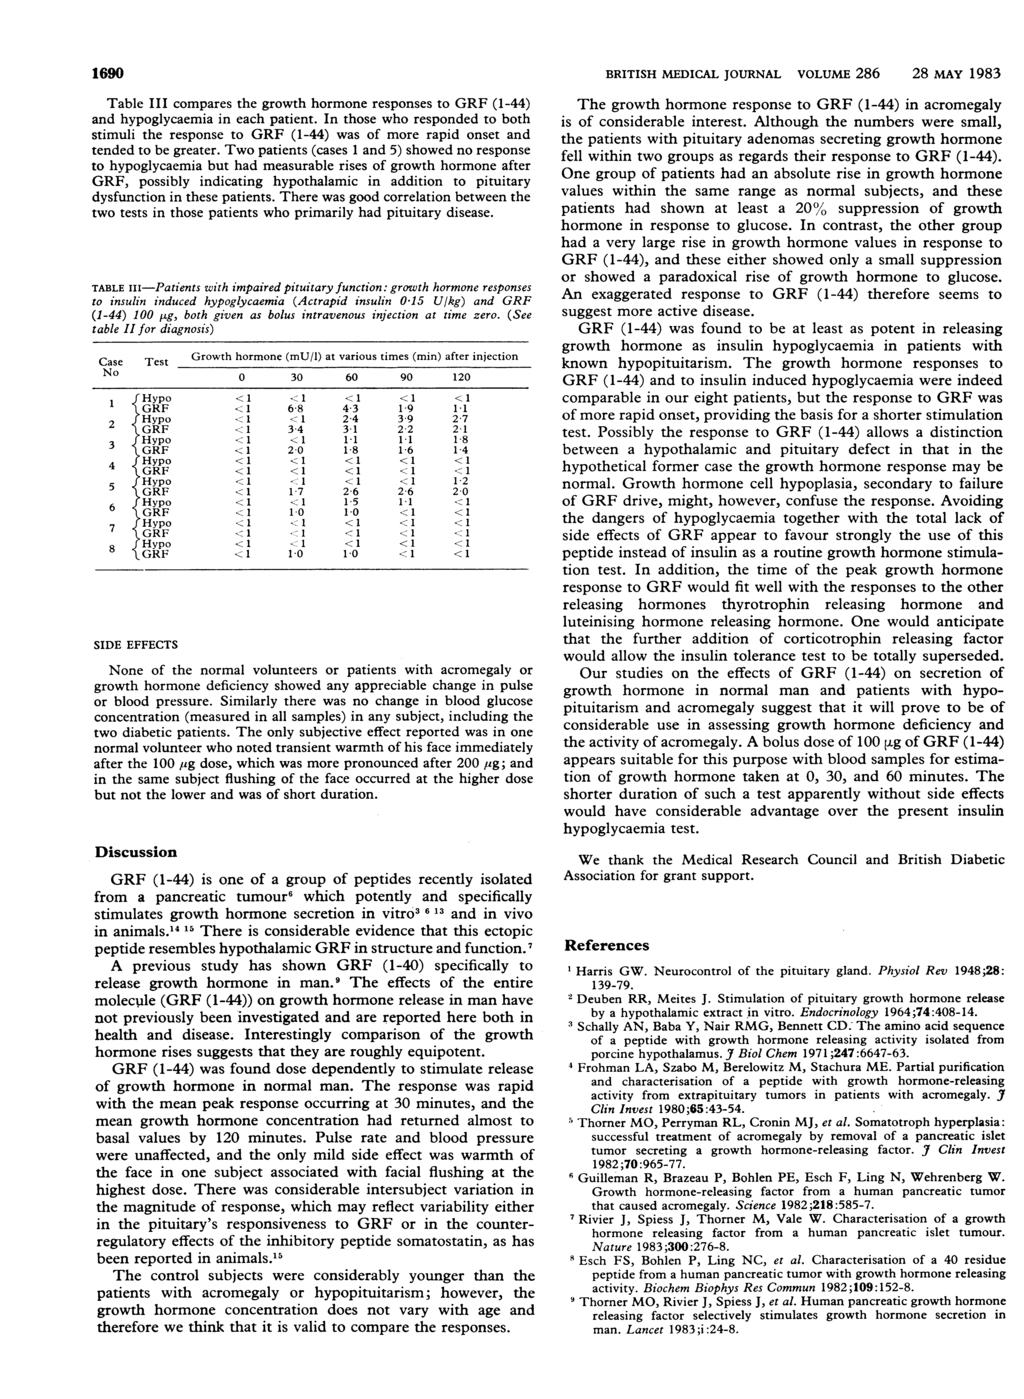 1690 BRITISH MEDICAL JOURNAL VOLUME 286 28 MAY 1983 Table III compares the growth hormone responses to (1-44) and hypoglycaemia in each patient.